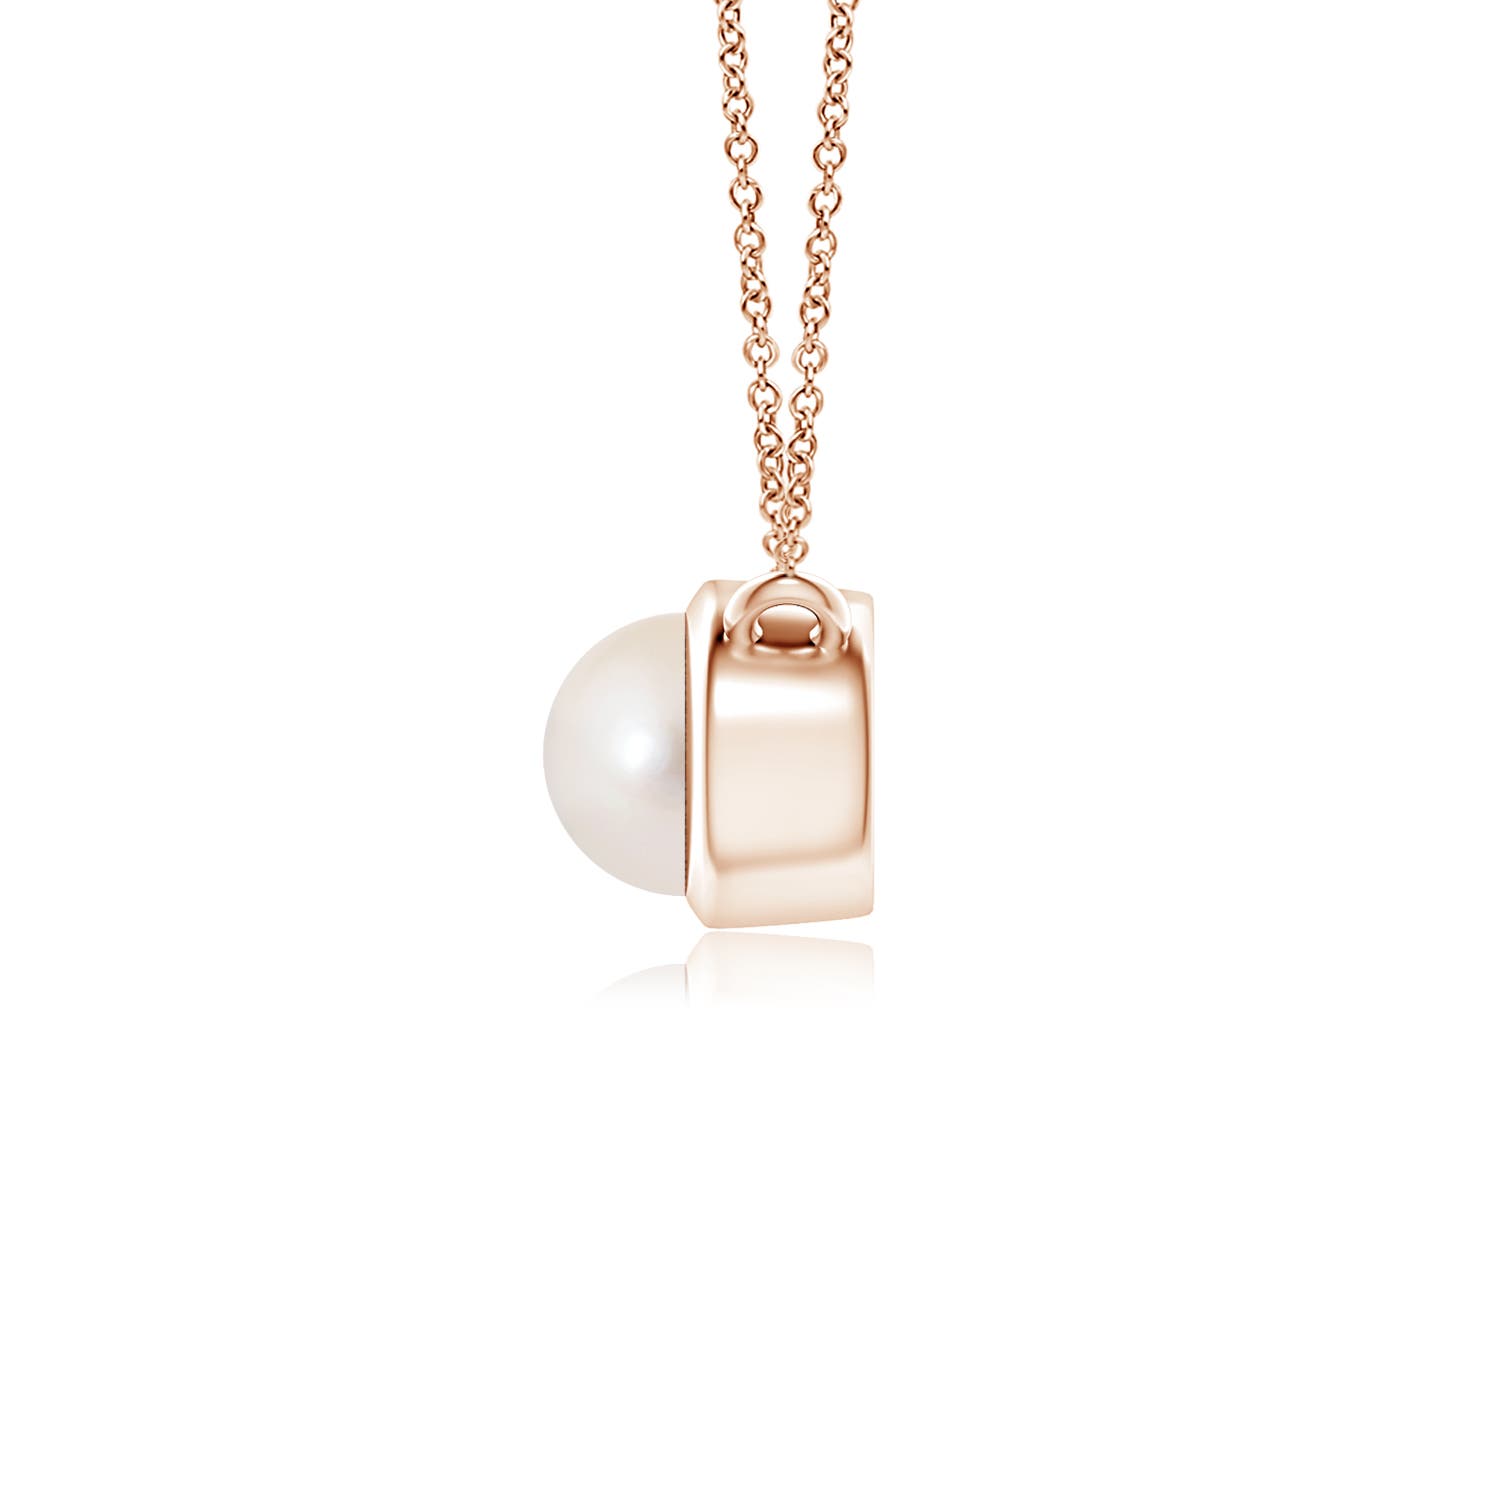 AAAA / 0.4 CT / 14 KT Rose Gold